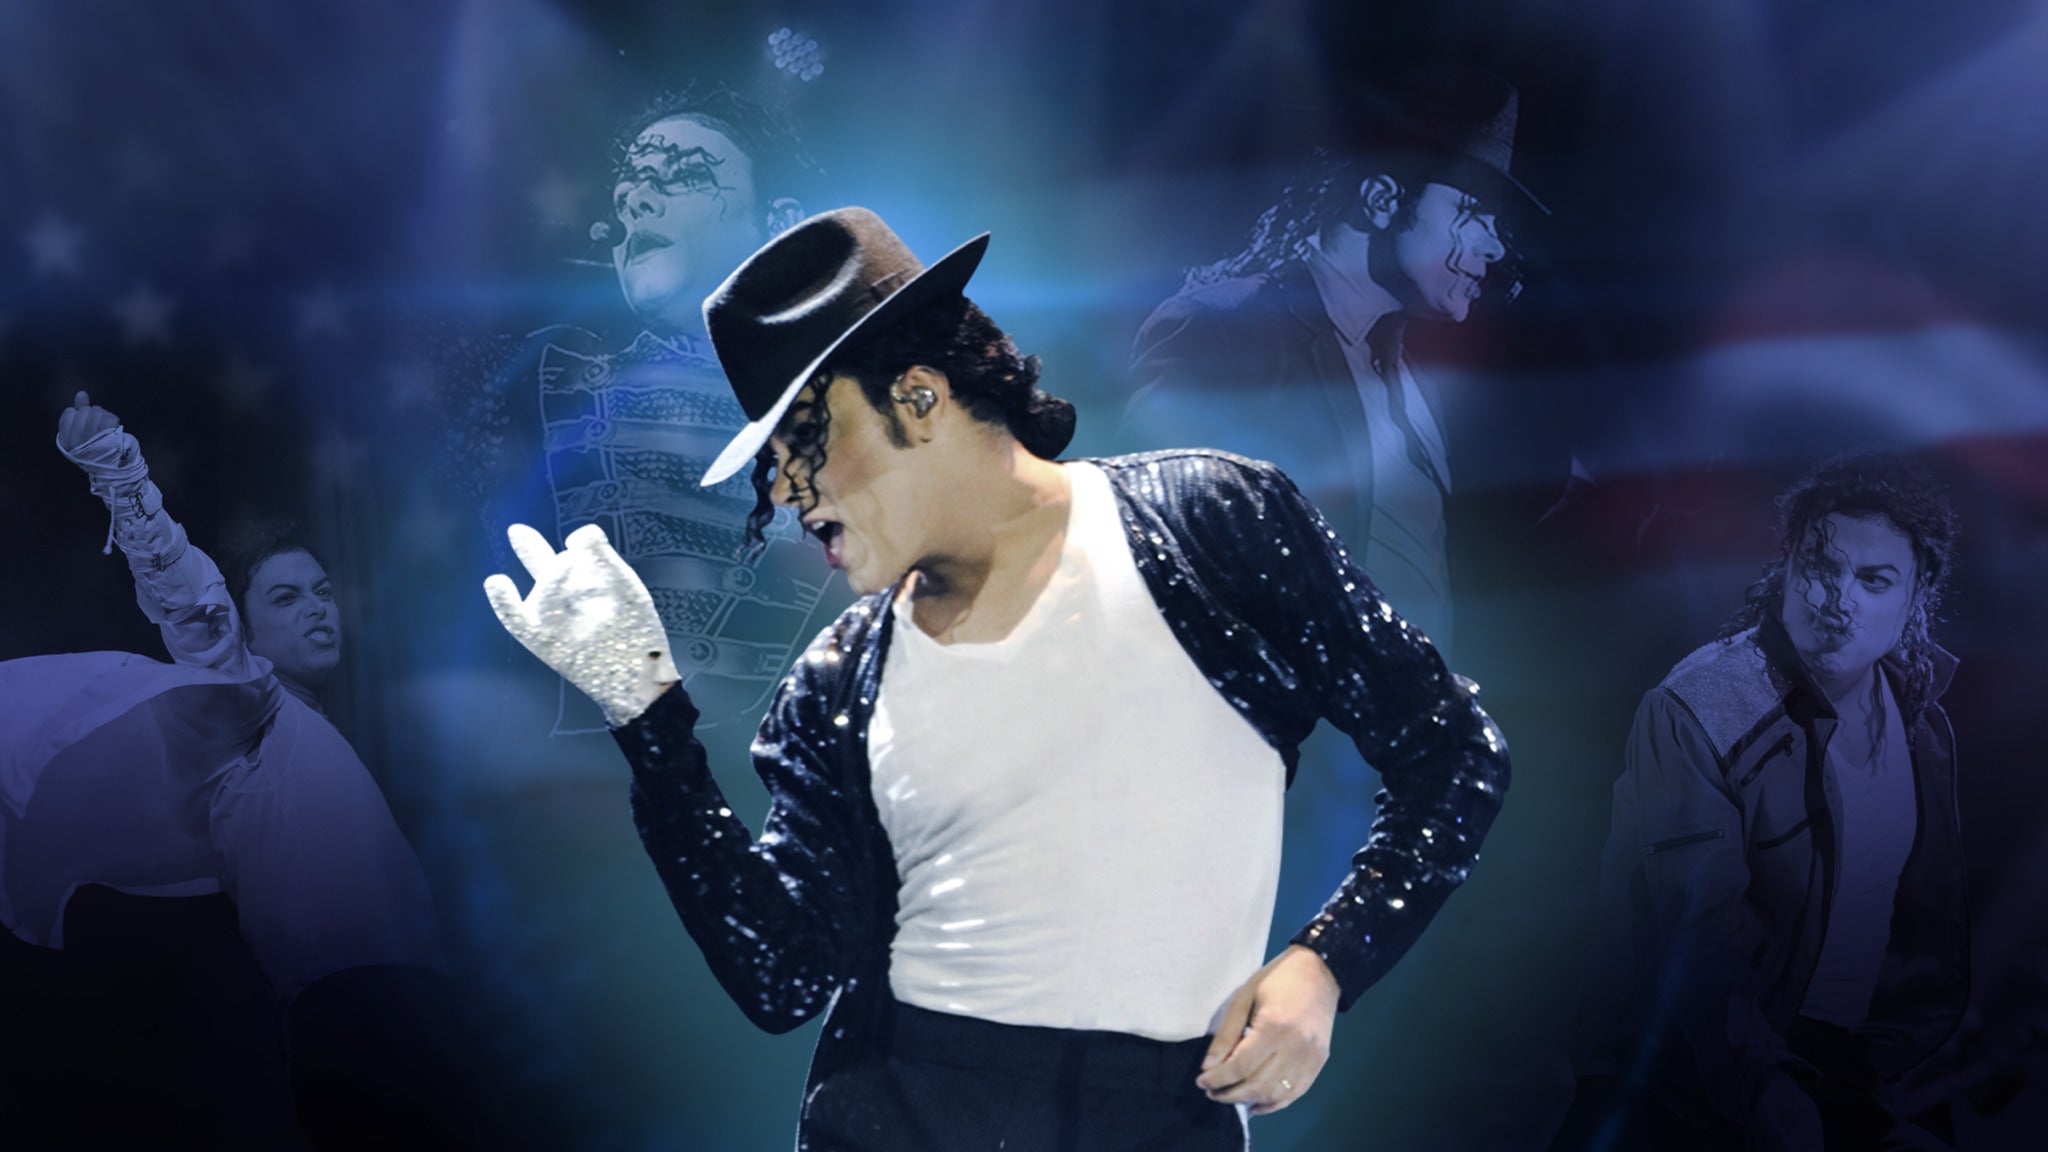 Michael Lives Forever pre-sale code for approved tickets in Atlantic City